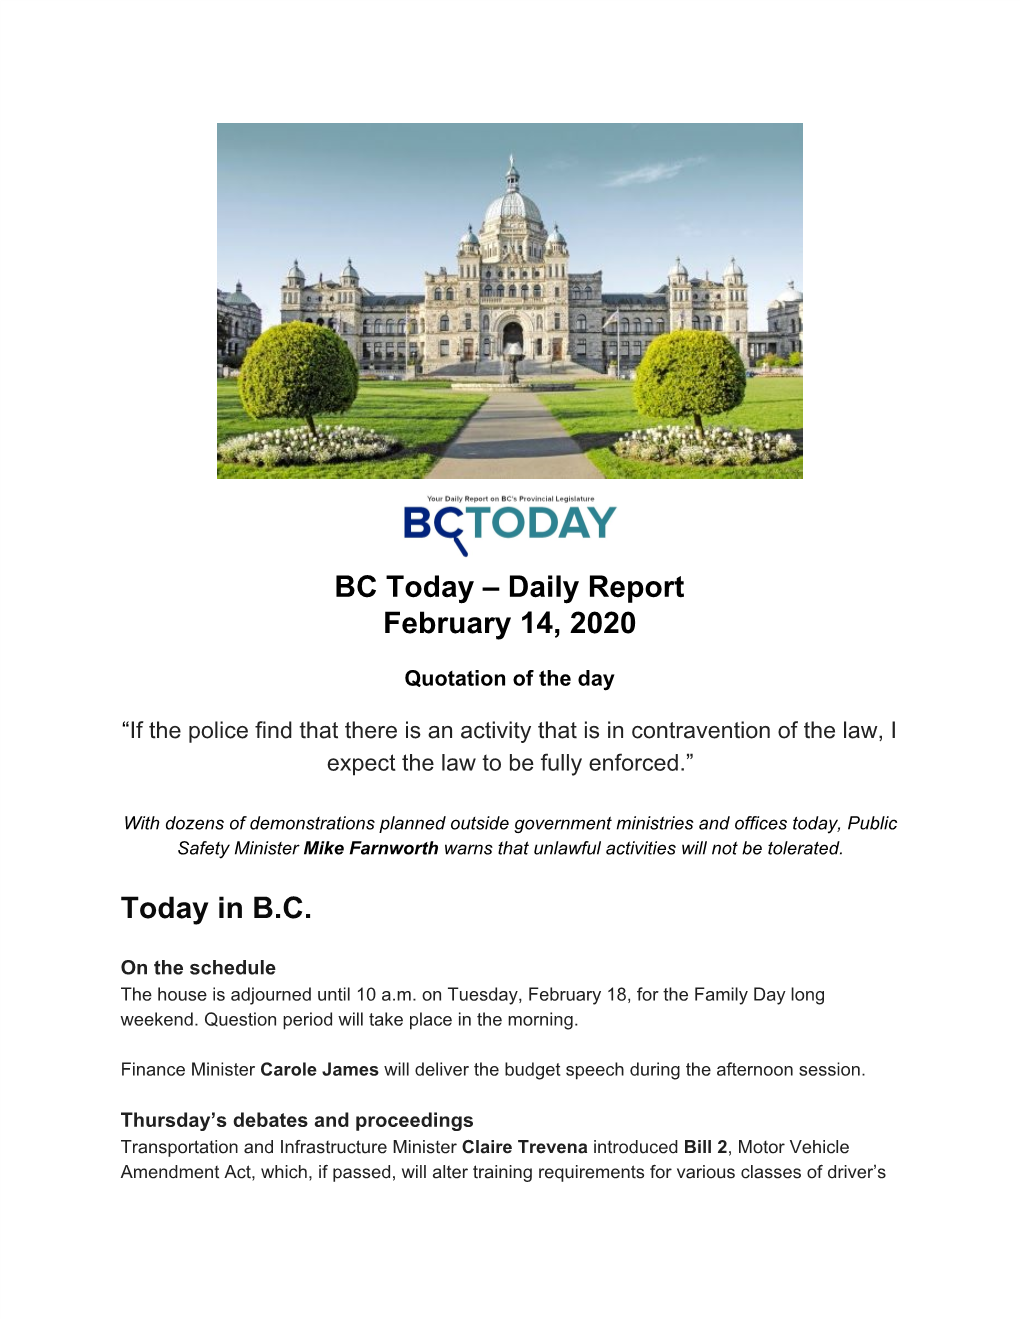 Daily Report February 14, 2020 Today in BC